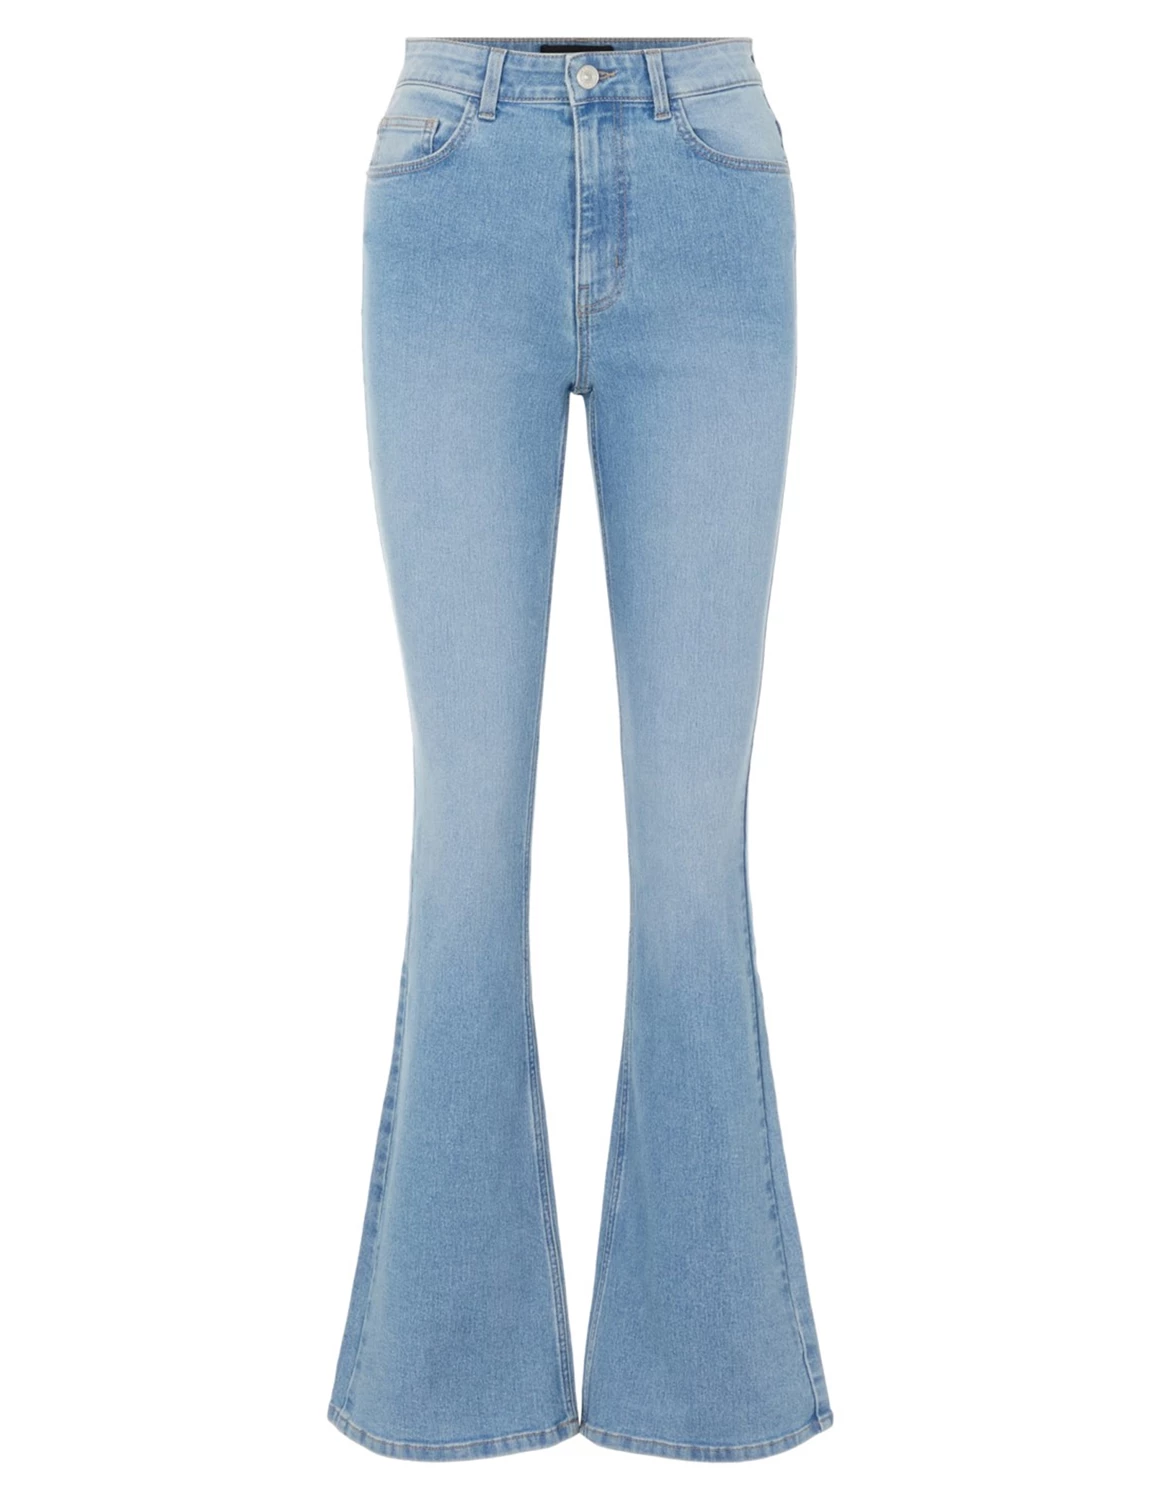 opwinding Vulkaan Vier Pieces PCPEGGY FLARED HW JEANS LB NOOS BC 17123711 blauw kopen bij The Stone